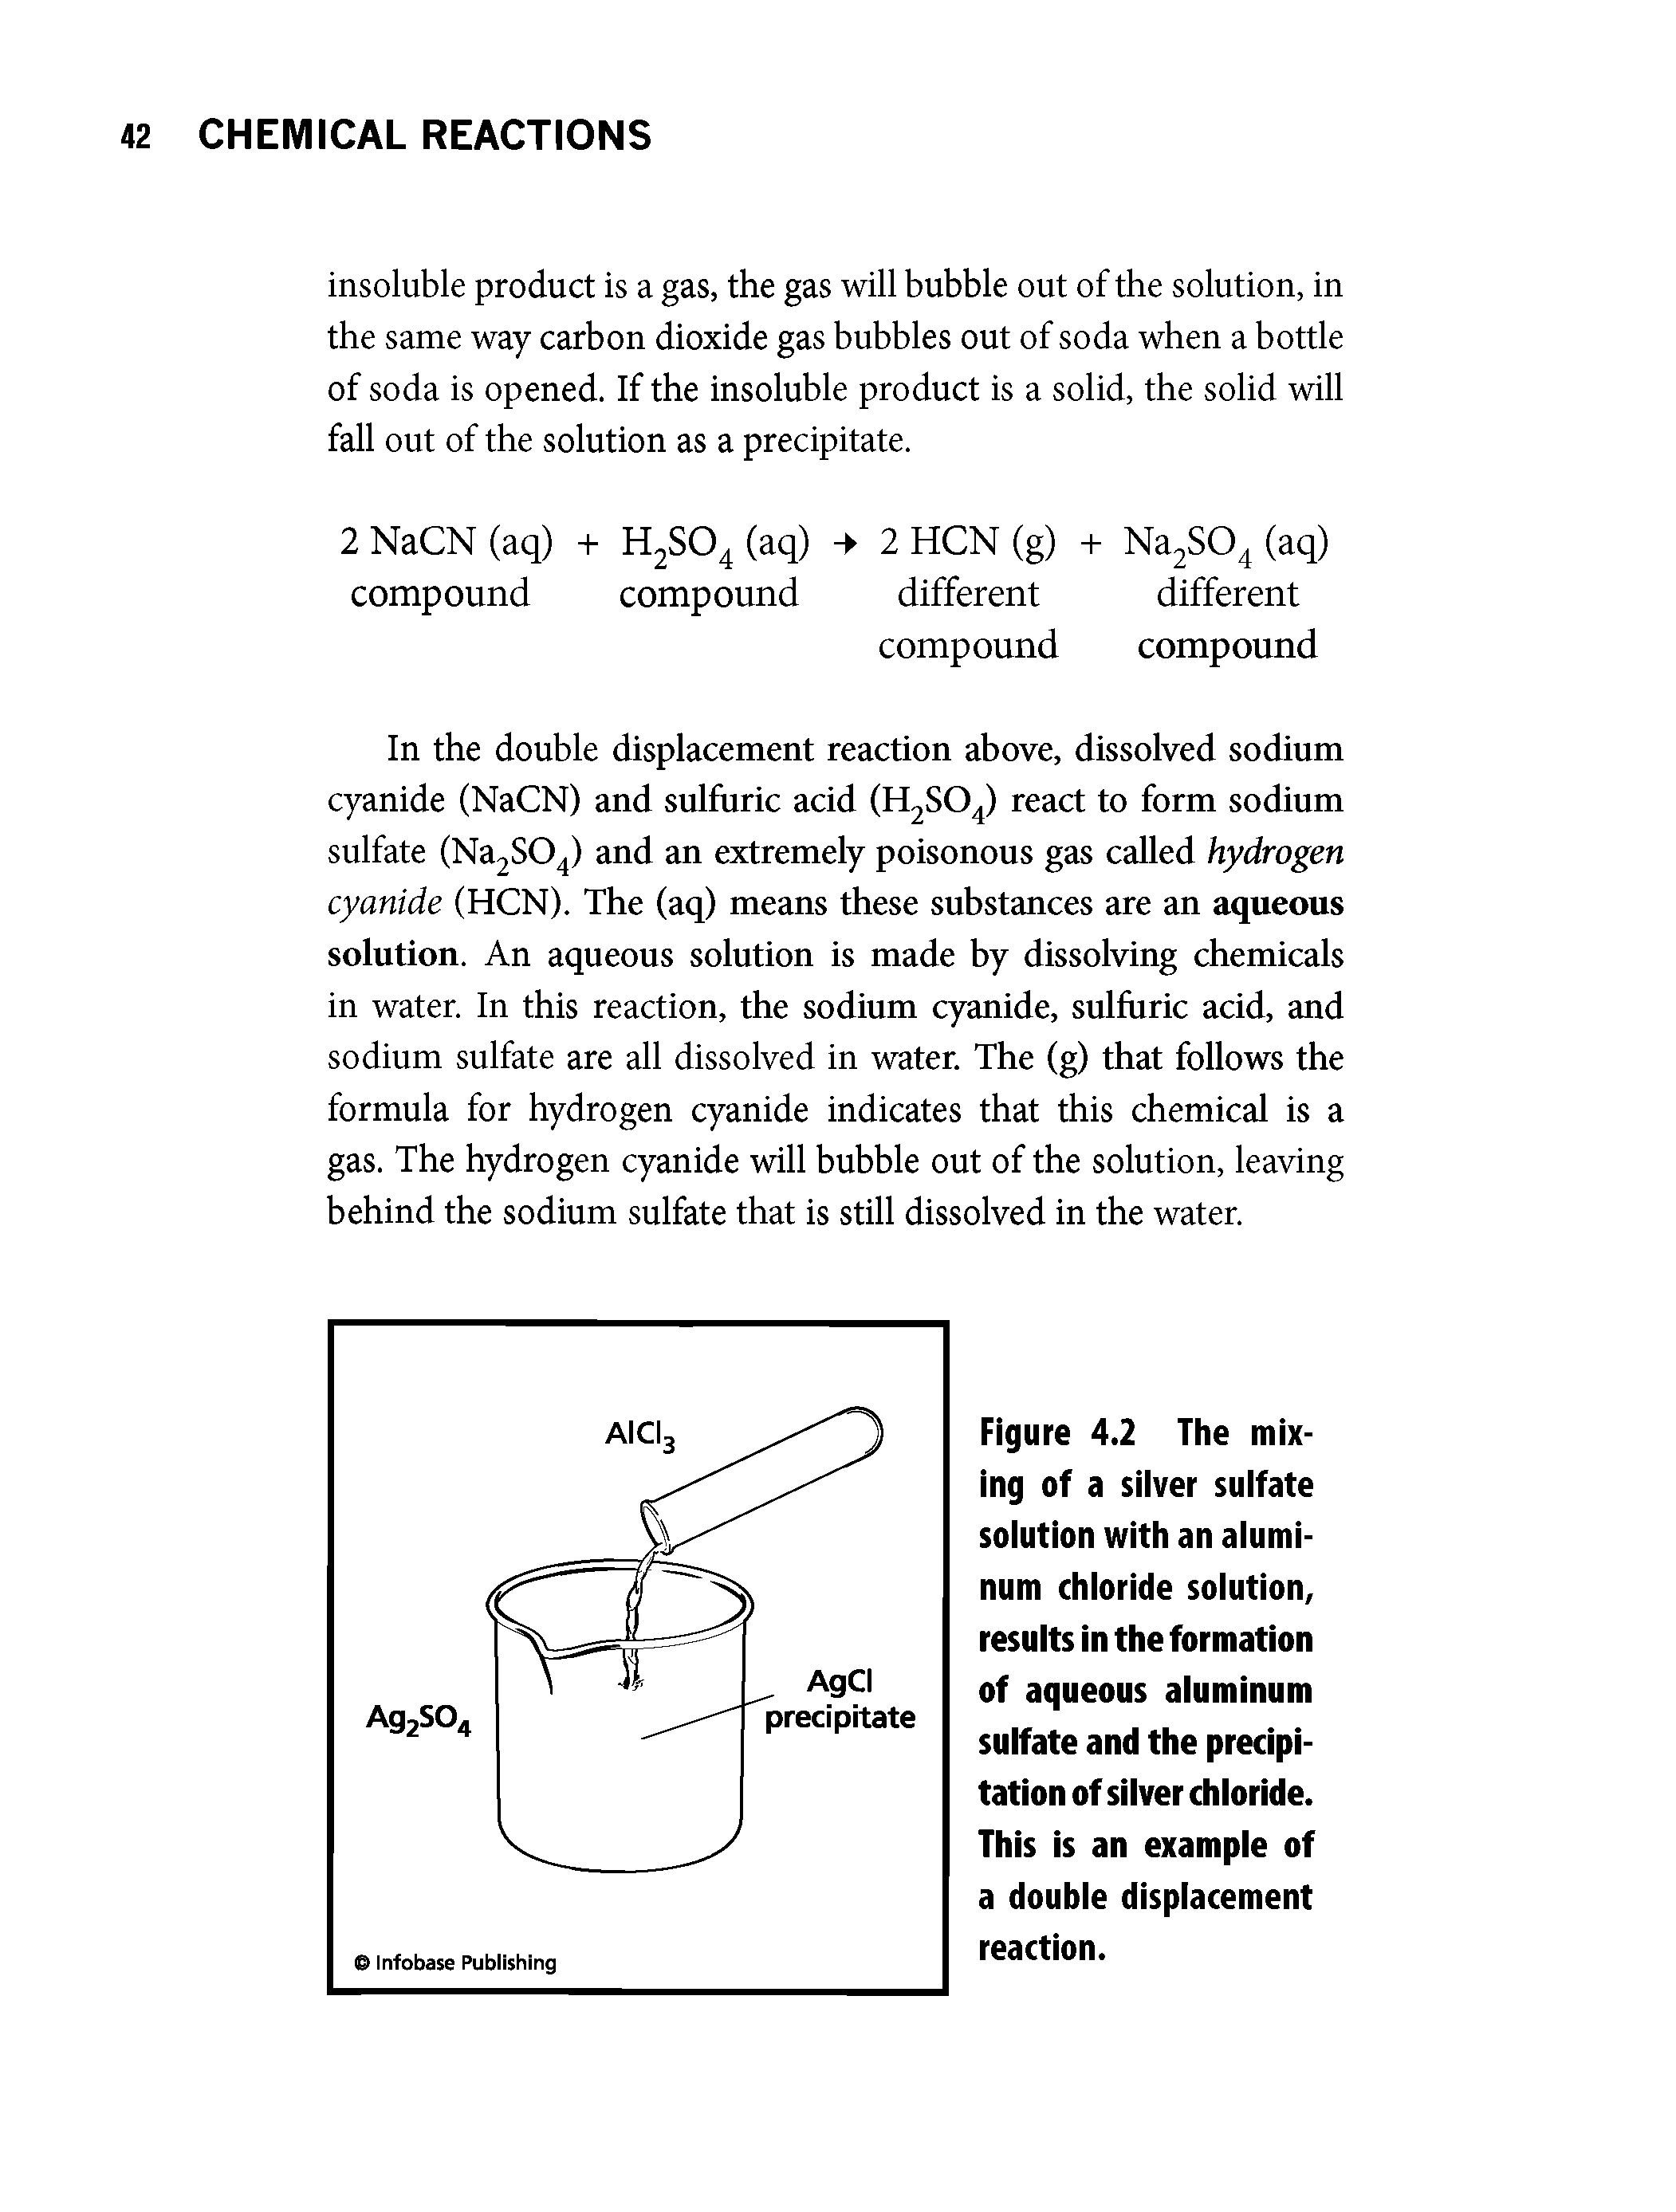 Figure 4.2 The mixing of a silver sulfate solution with an aluminum chloride solution, results in the formation of aqueous aluminum sulfate and the precipitation of silver chloride. This is an example of a double displacement reaction.